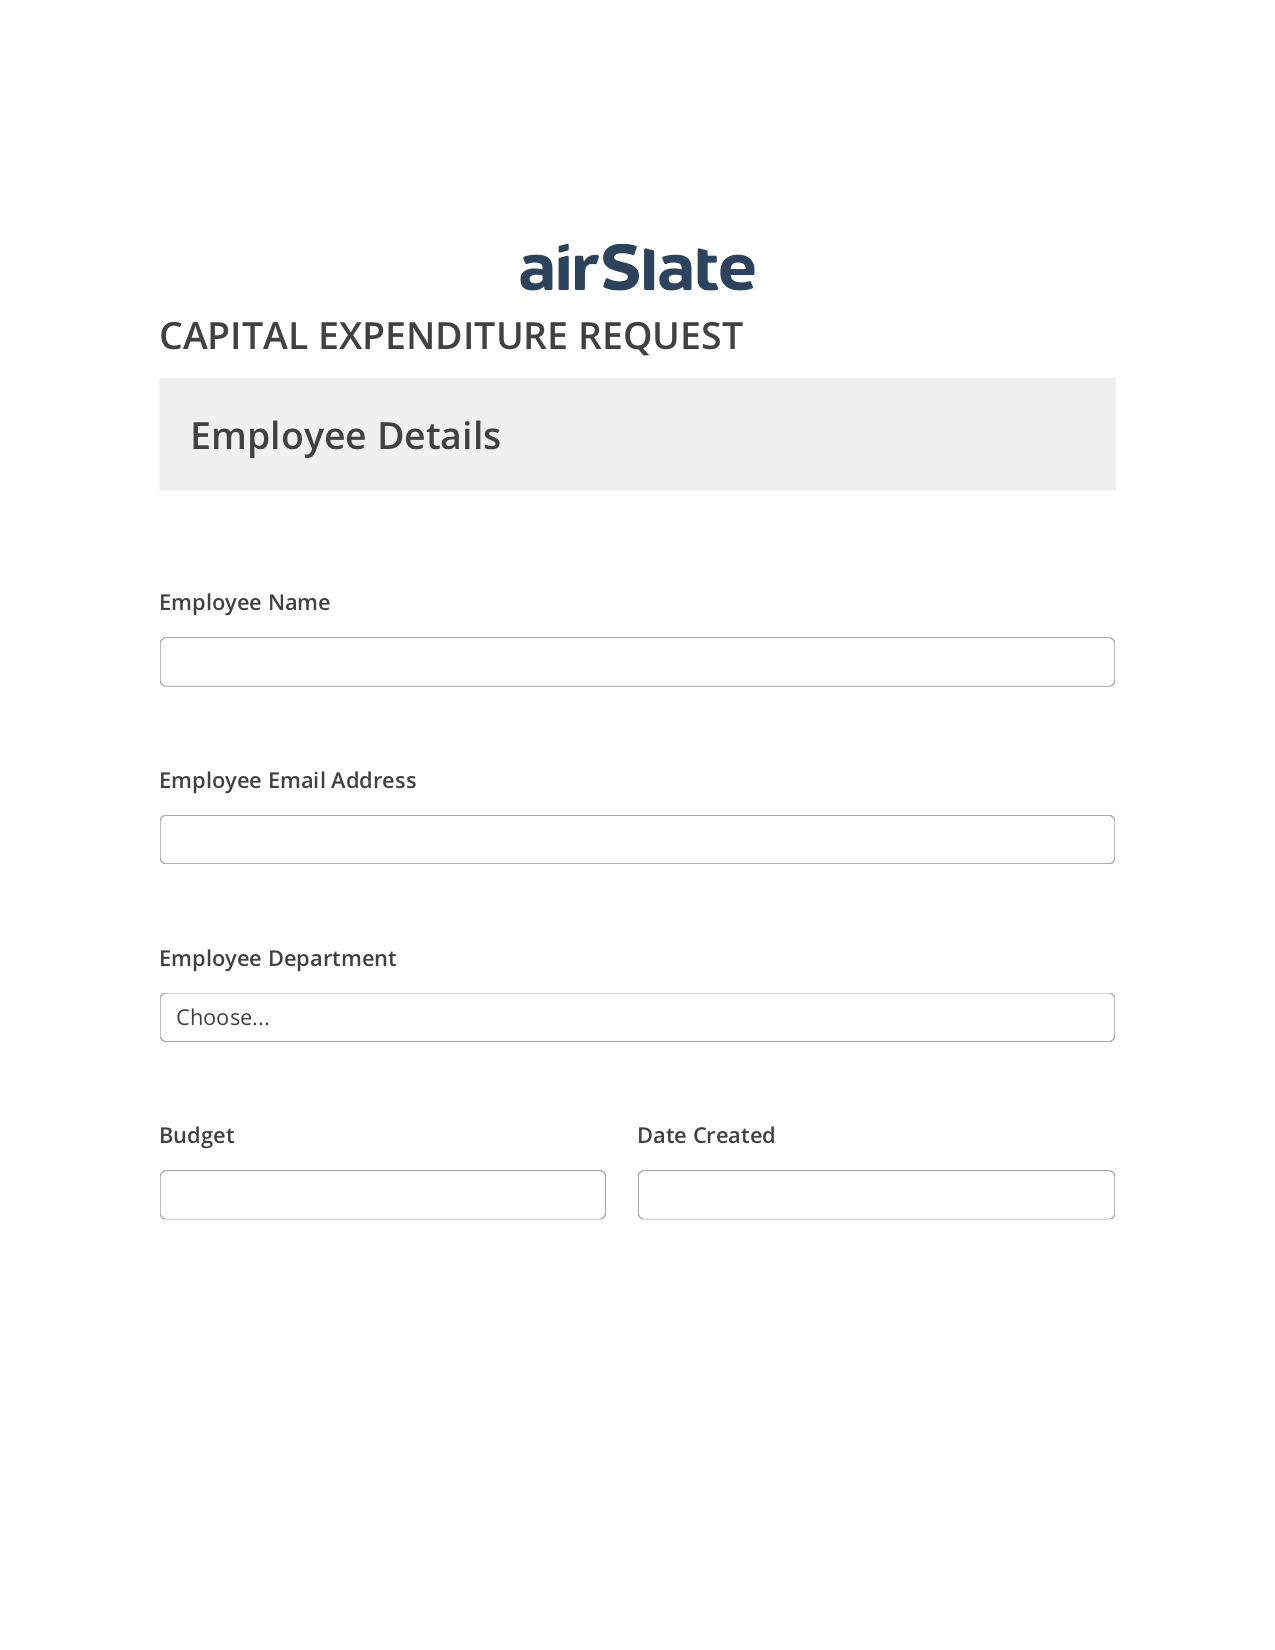 Capital Expenditure Request Approval Workflow Pre-fill Slate from MS Dynamics 365 record, Assign Roles to Recipients Bot, Archive to SharePoint Folder